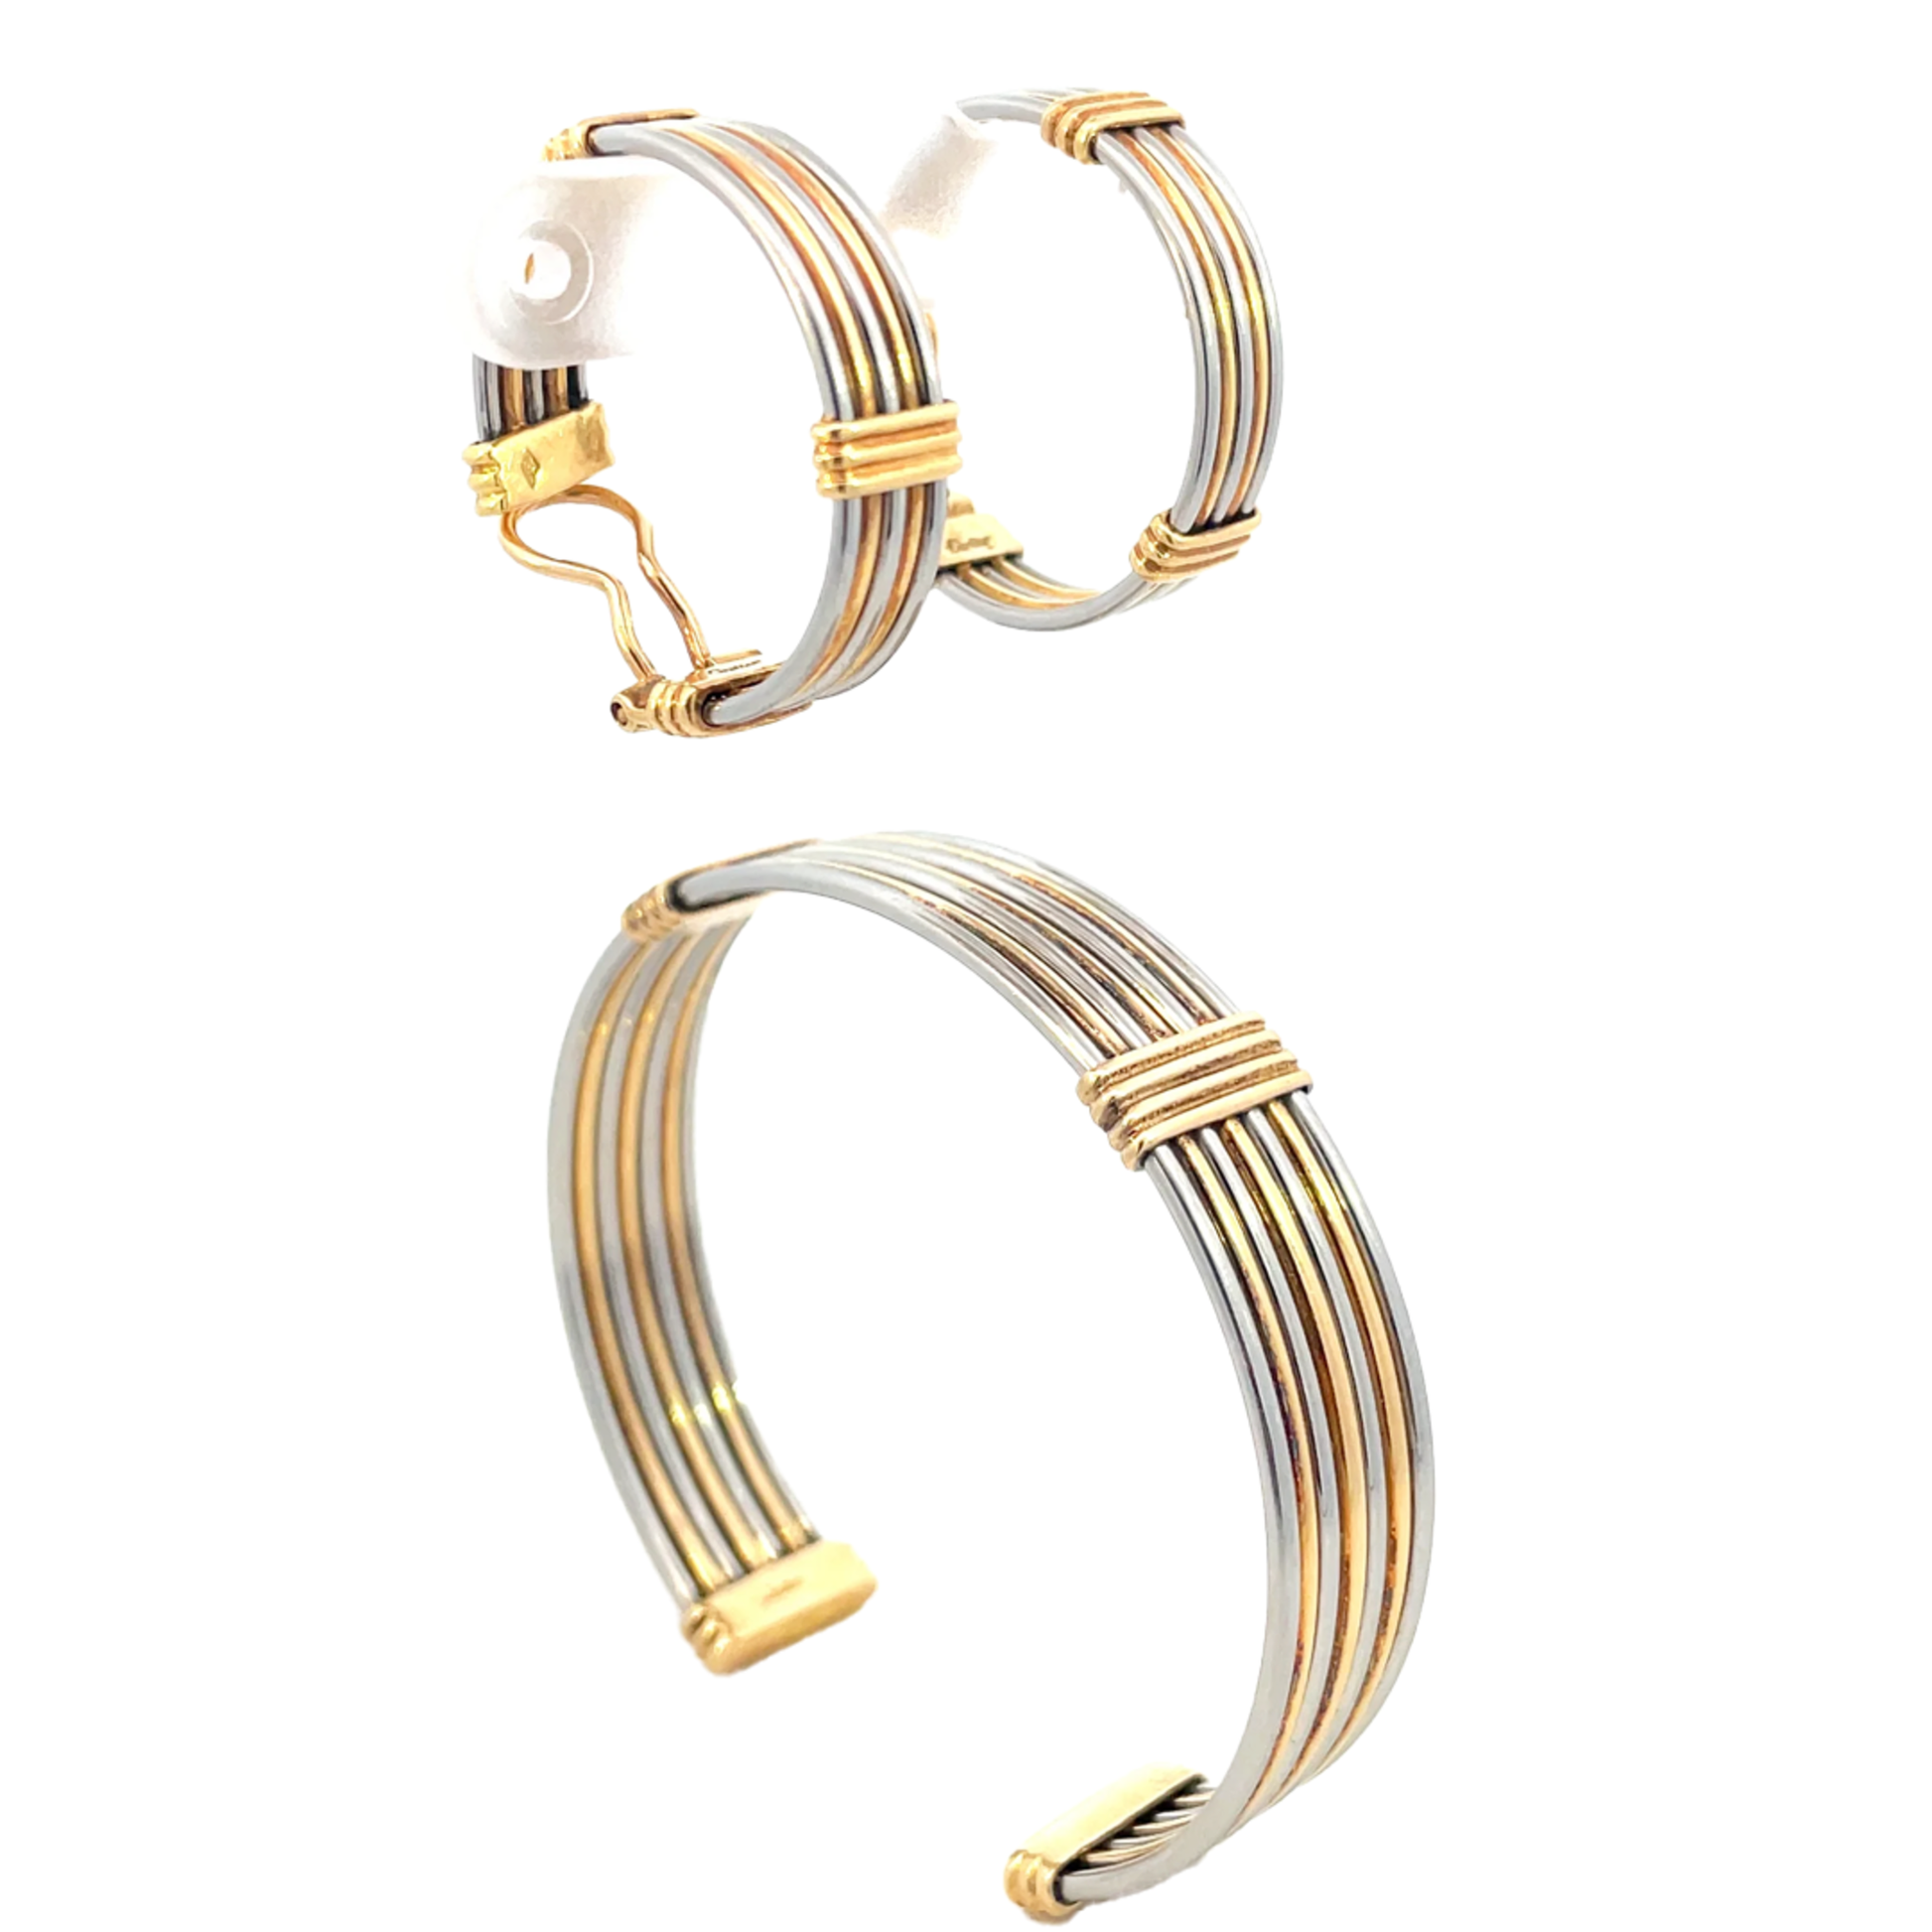 Cartier 1980s 18KT Yellow Gold Stainless Steel Earring & Bangle Bracelet Set front and side